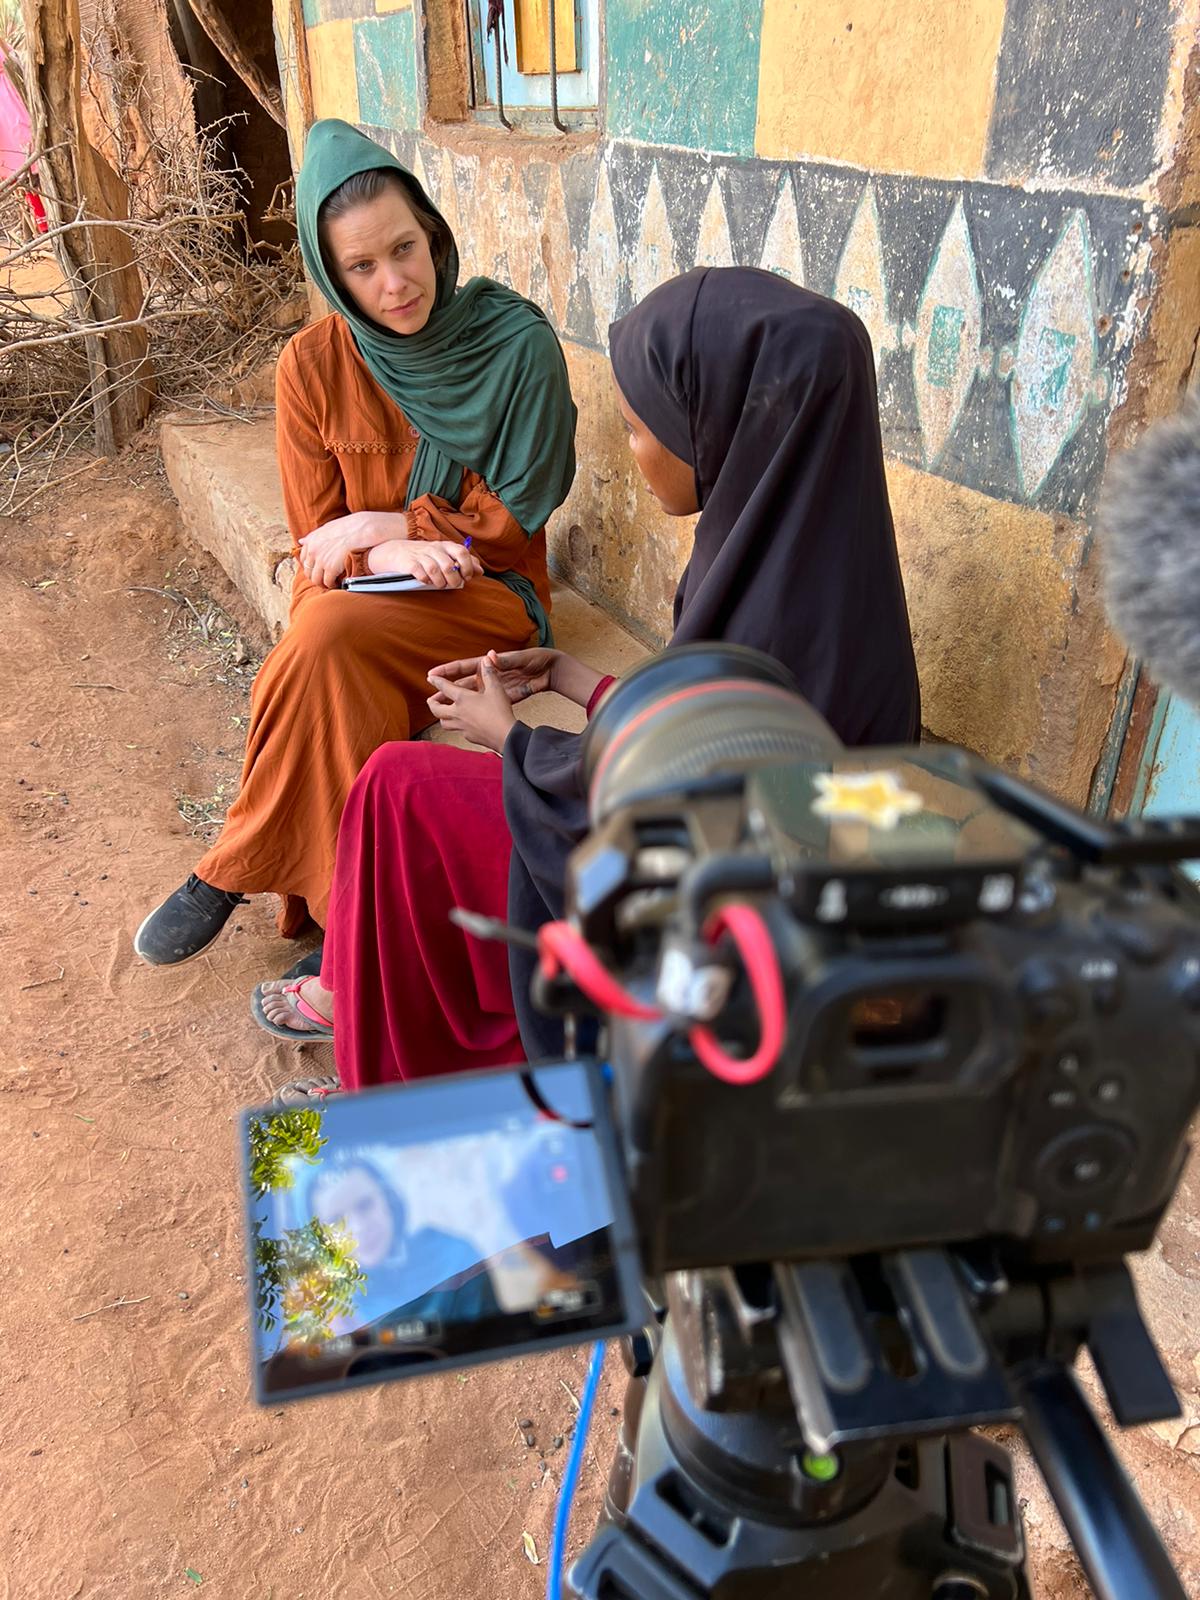 Foreign Correspondent reporter Stephanie March on the challenges and heartbreak of filming a story about looming famine in Somalia pic